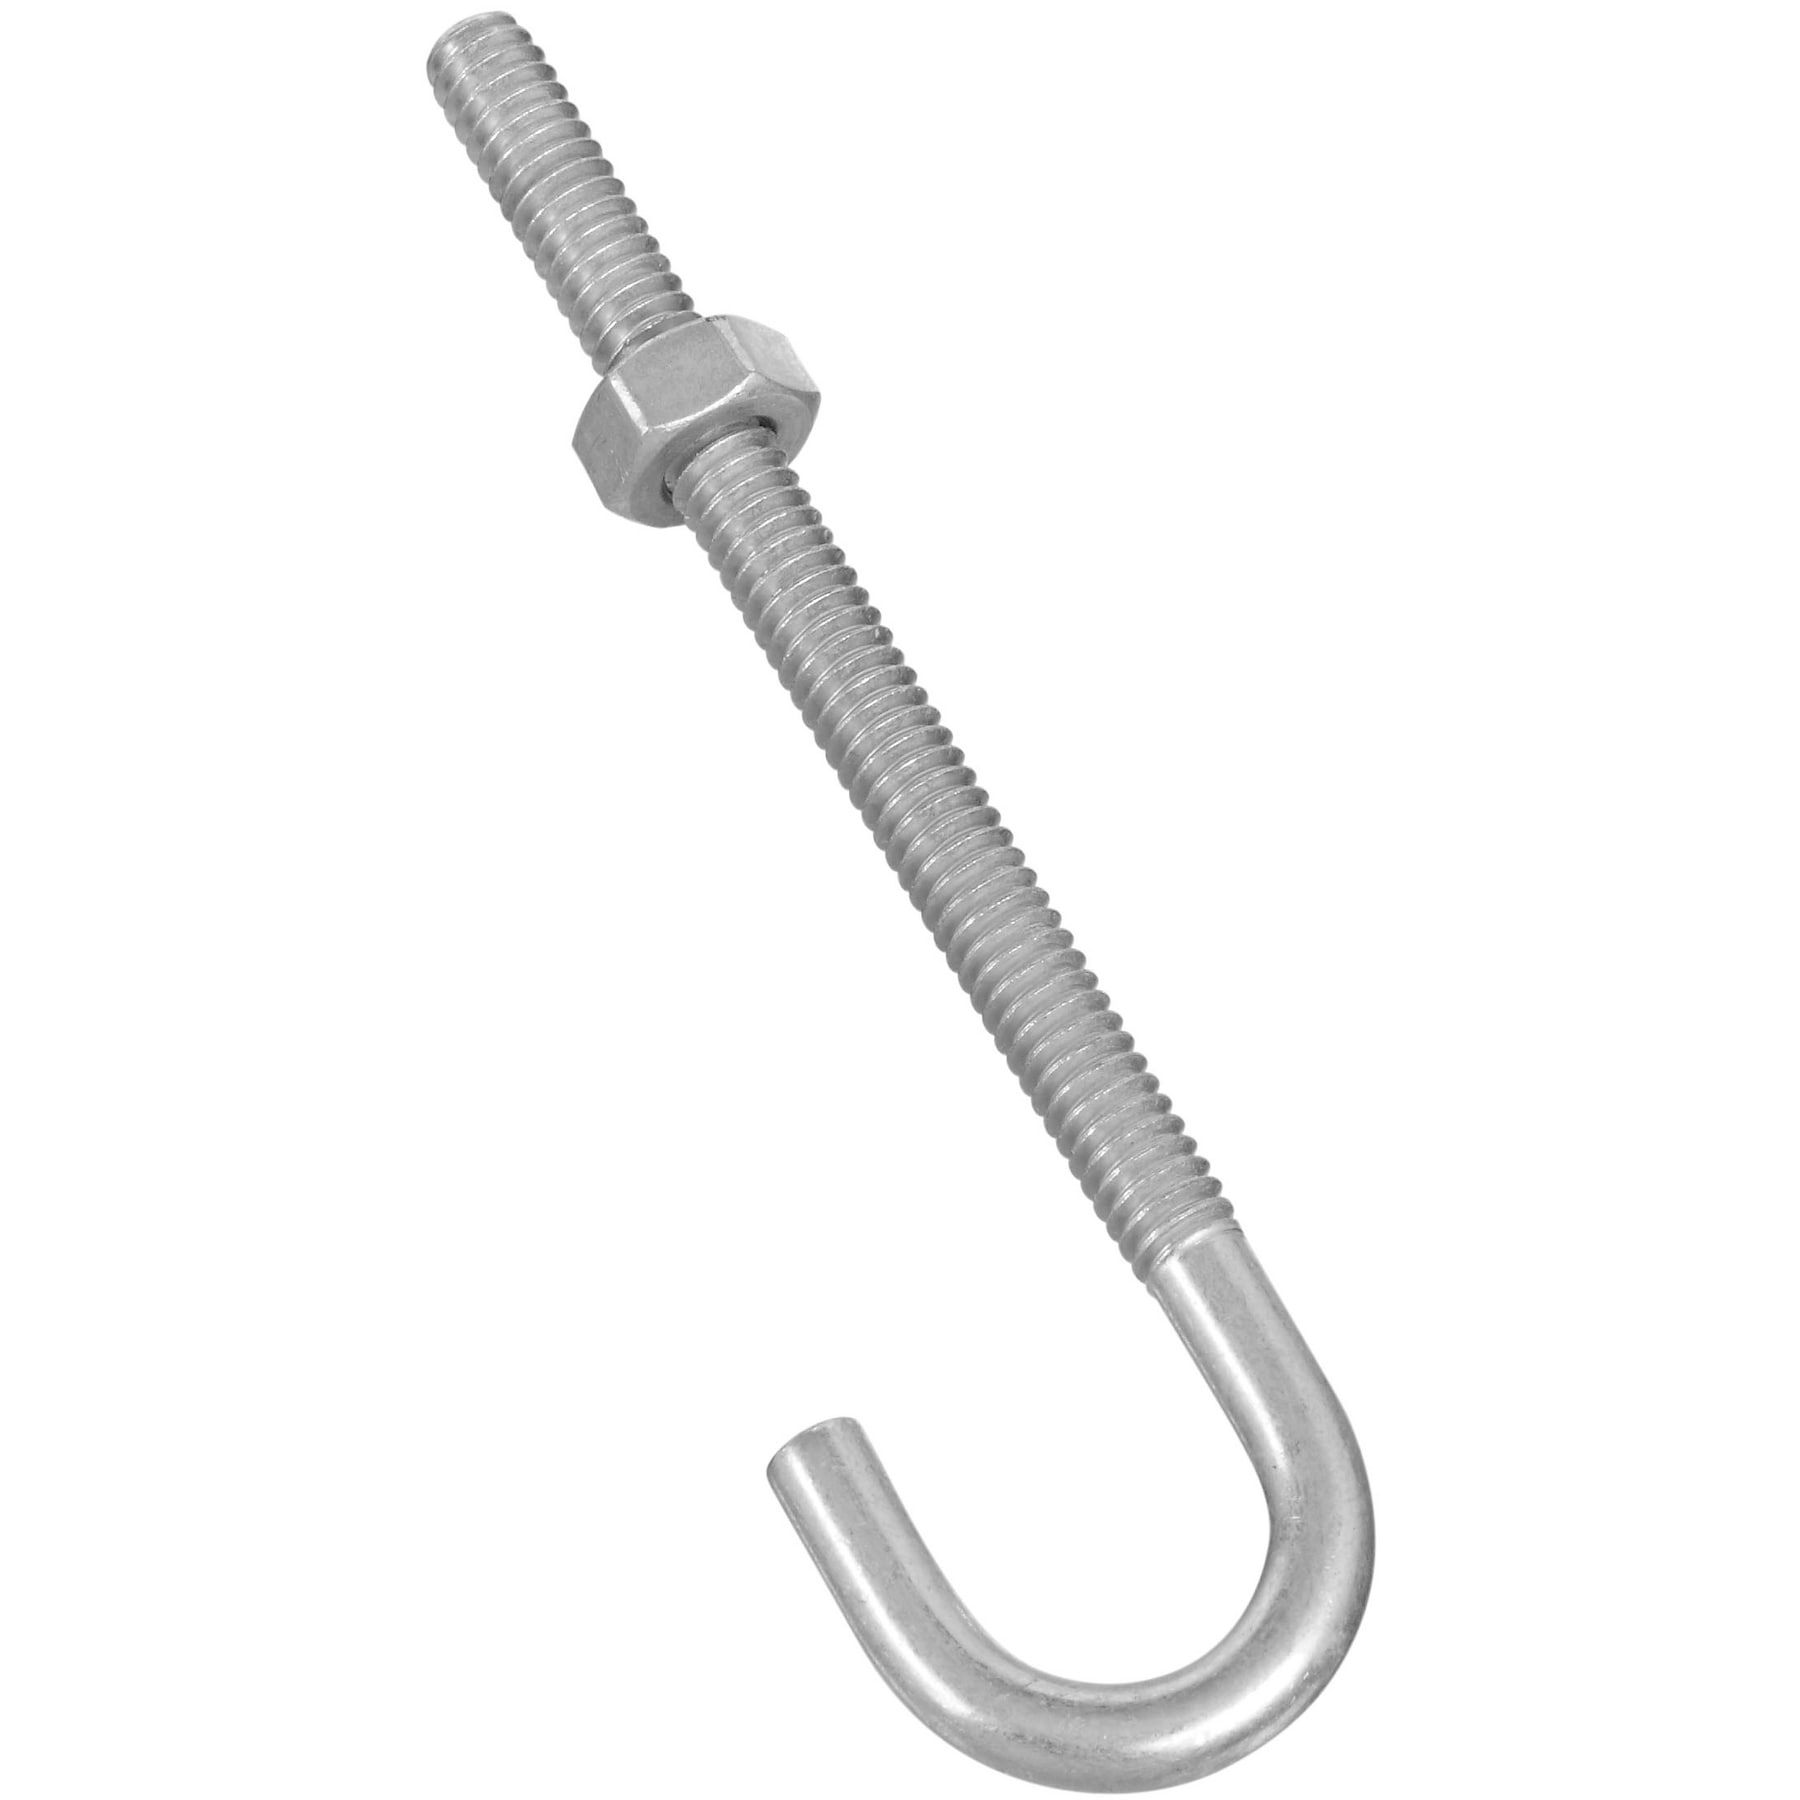 National Hardware 1/4-in x 4-in Zinc-plated Coarse Thread Bolt